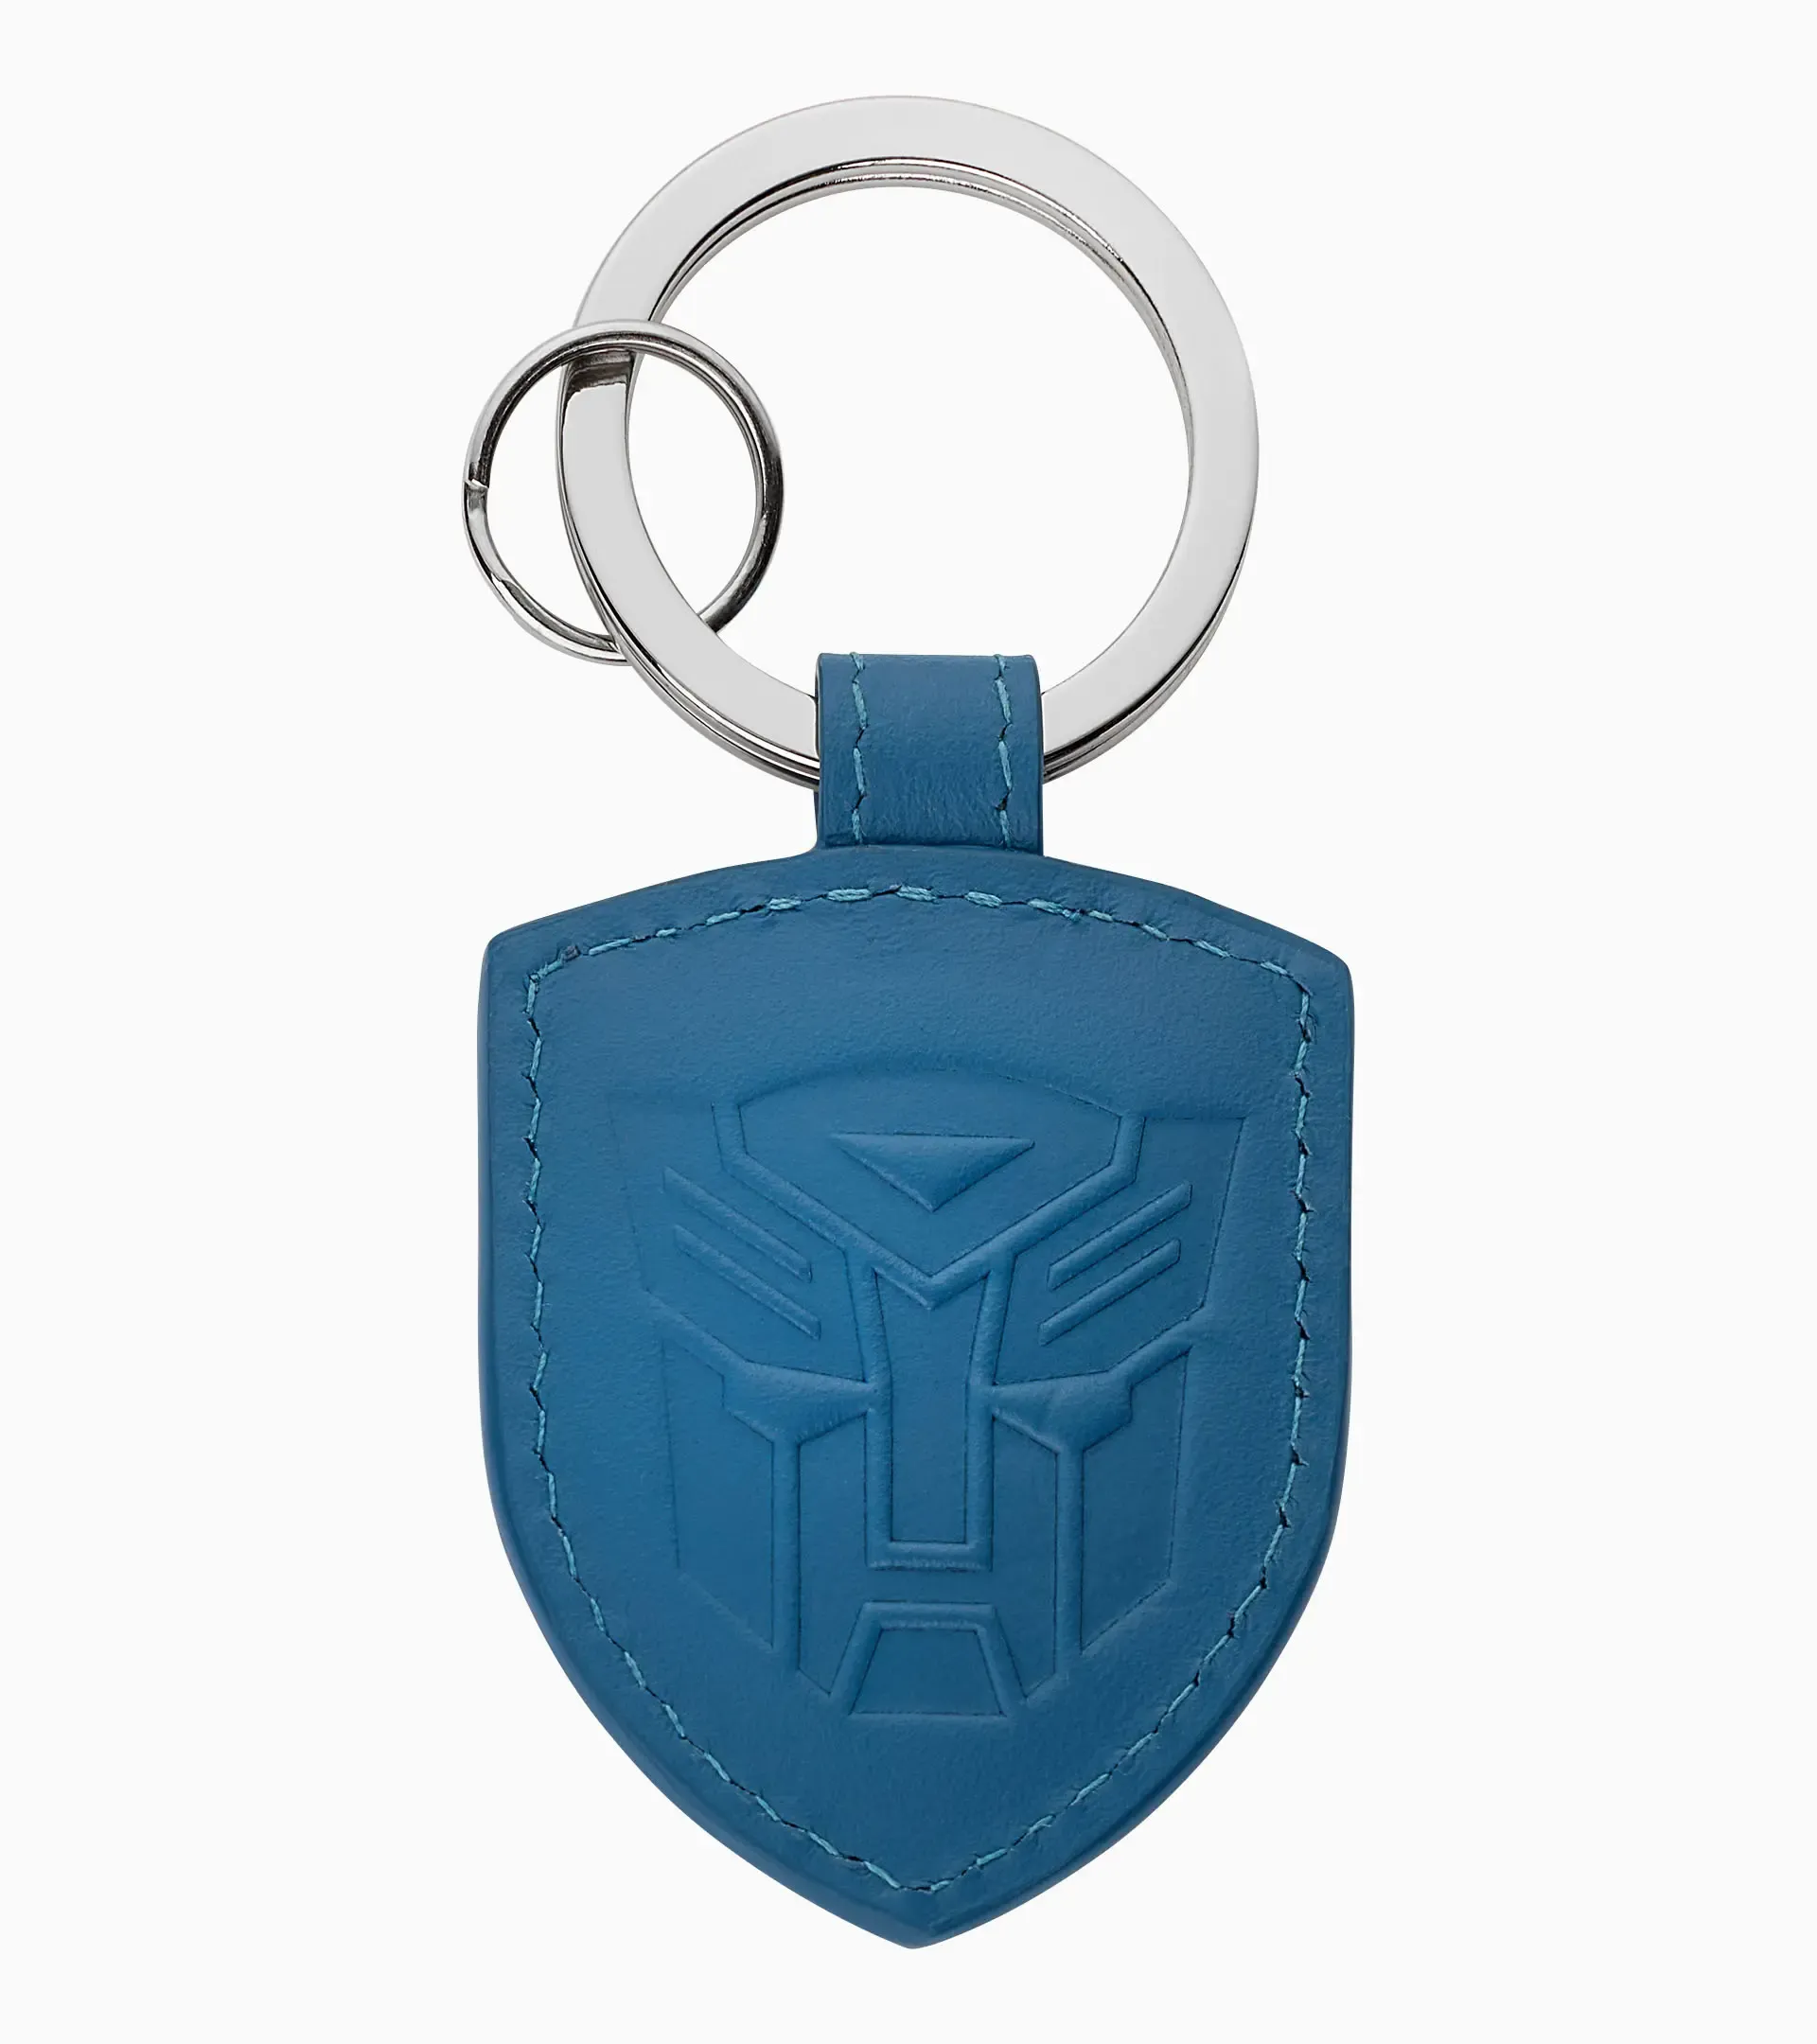 Porsche keychain coat of arms - blue - real leather - made in Germany - new